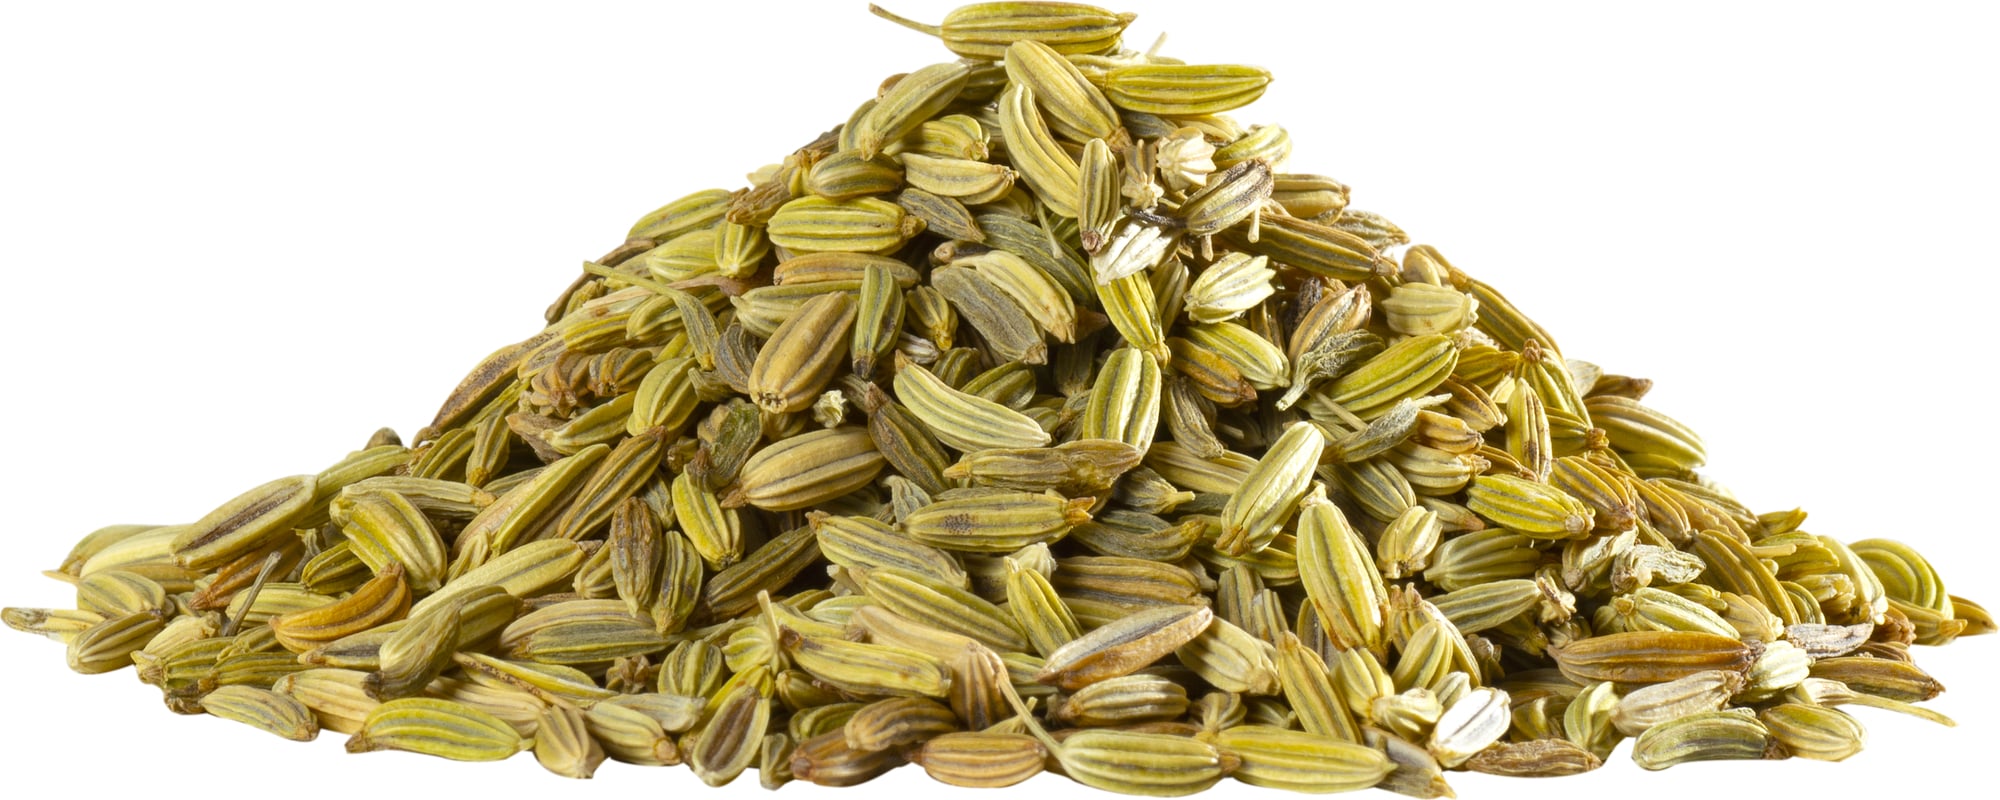 Fennel Seeds Suppliers in Ahmedabad, Gujarat, India